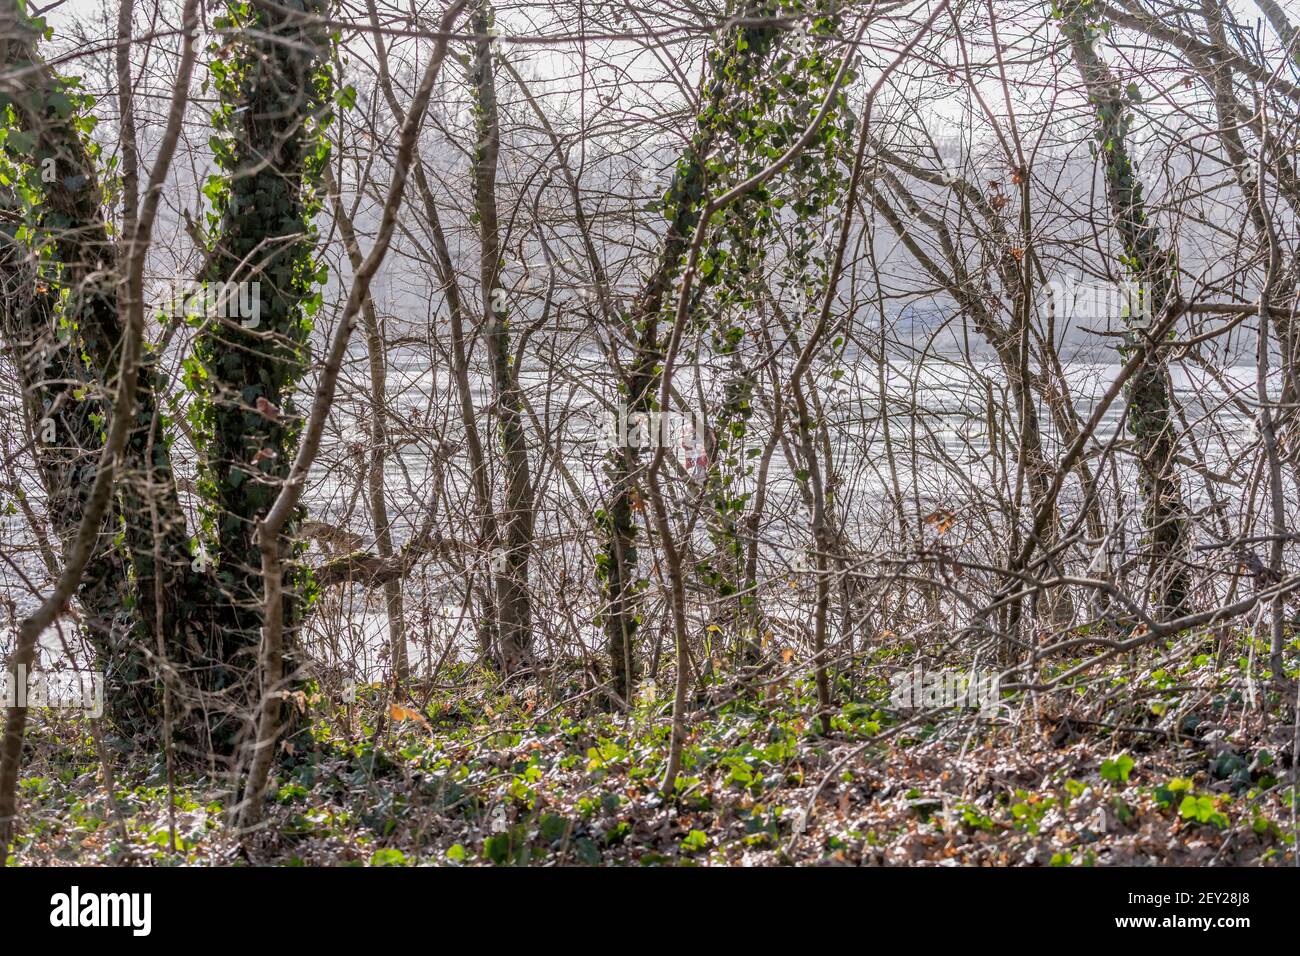 landscape with Ticino river looming through winter shrubs on shore, shot on bright winter day near Bereguardo, Pavia, Lombardy, Italy Stock Photo